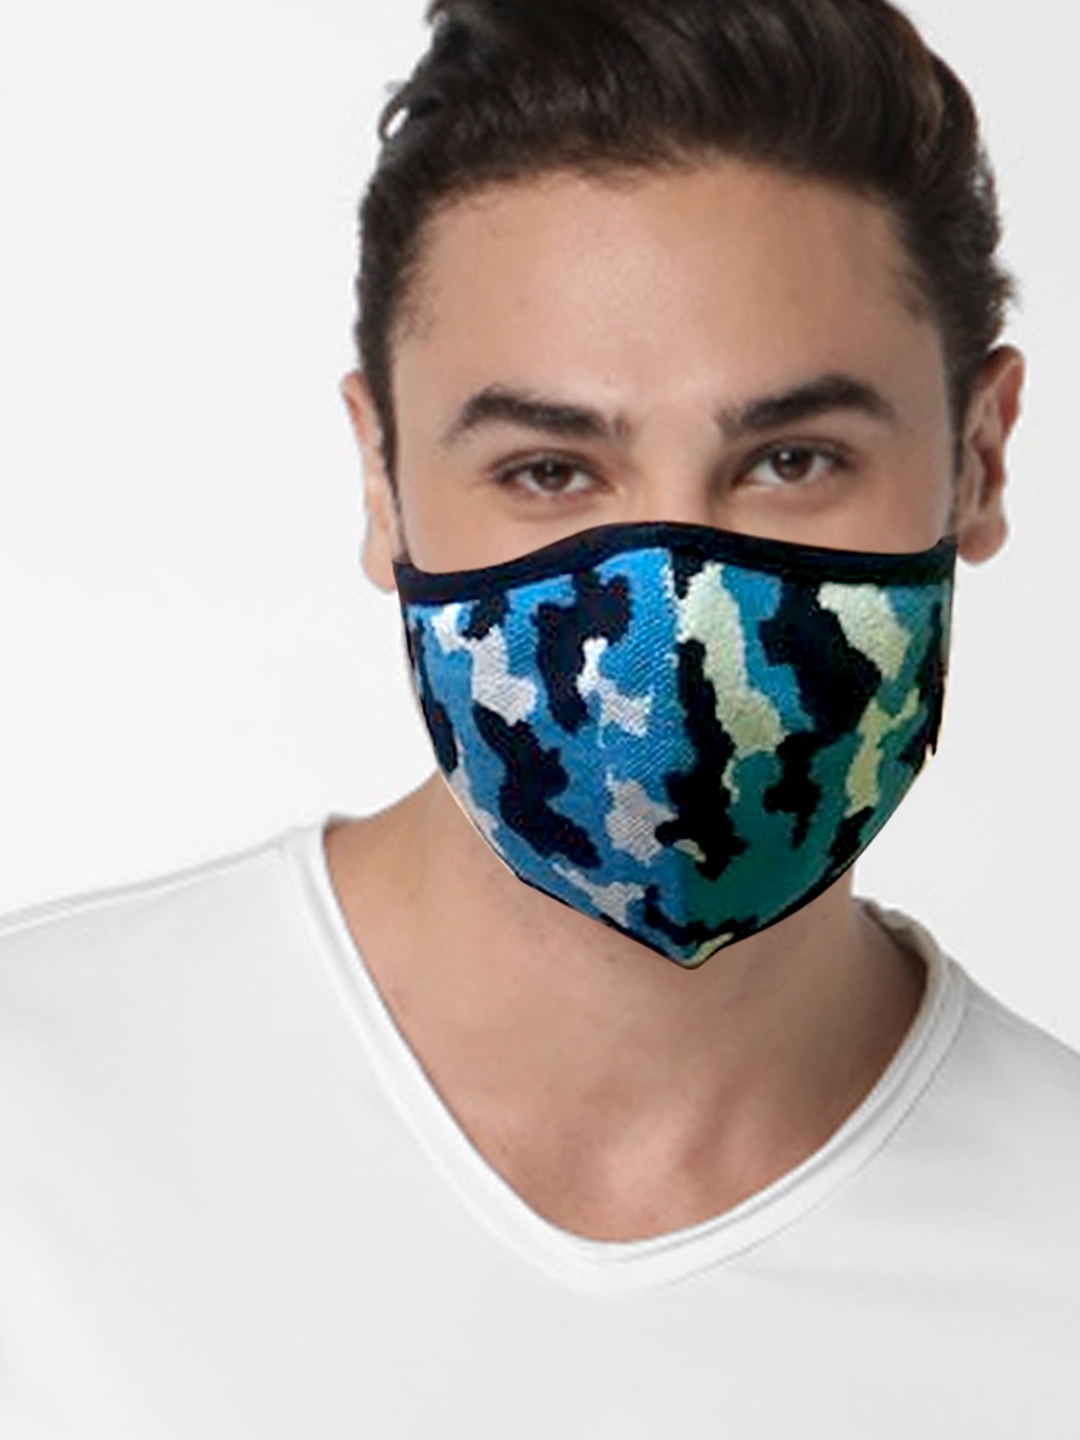 GAS Camouflage printed blue Mask